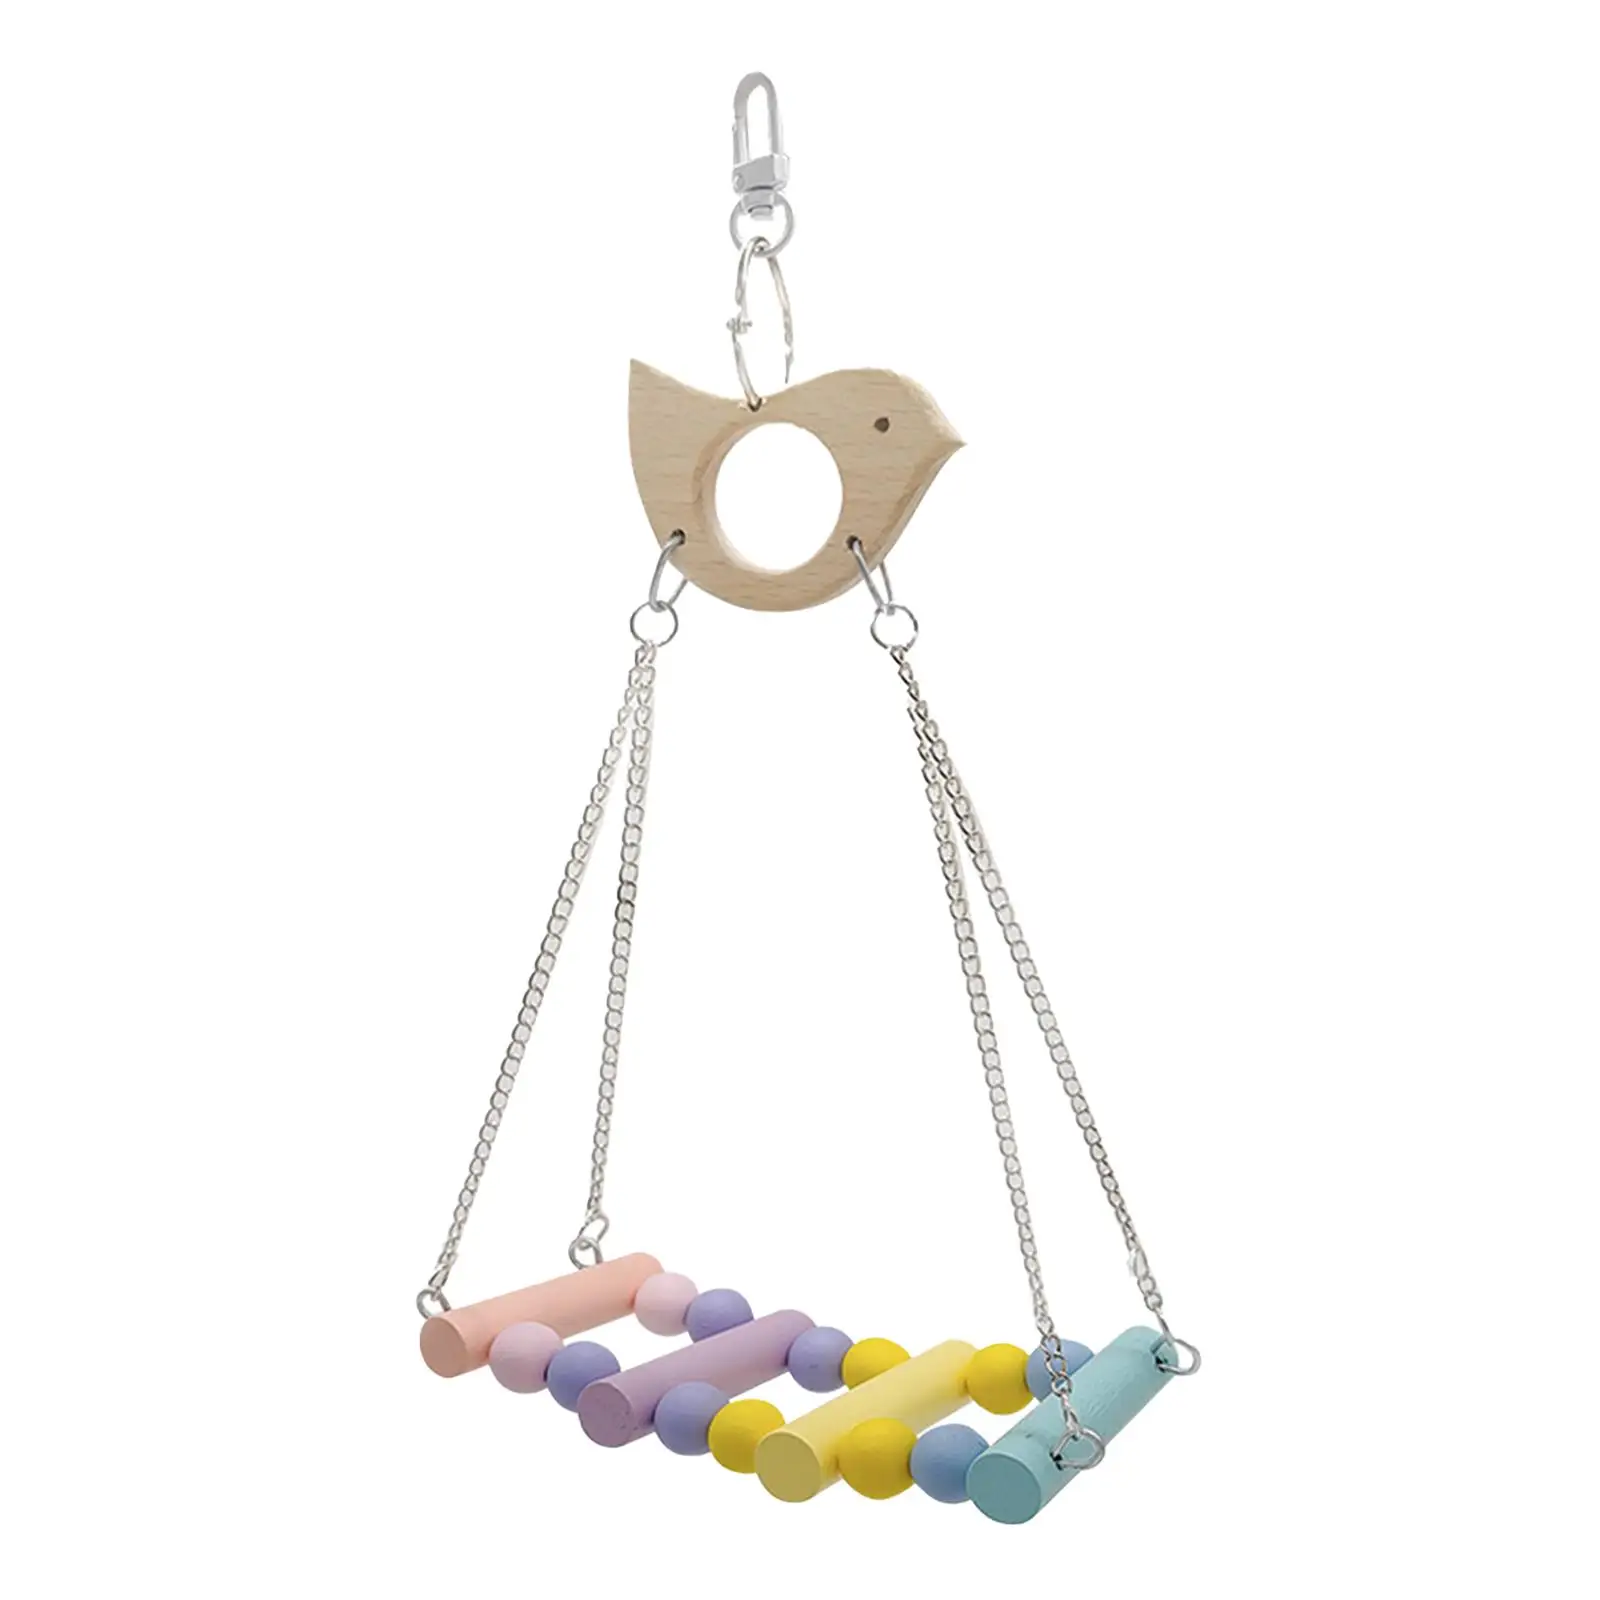 Bird Swing Toys Hanging Exercise Toy Ladder Chewing Parrot Perch Cage Toys Training Stand for Medium Large Small Canary Finches